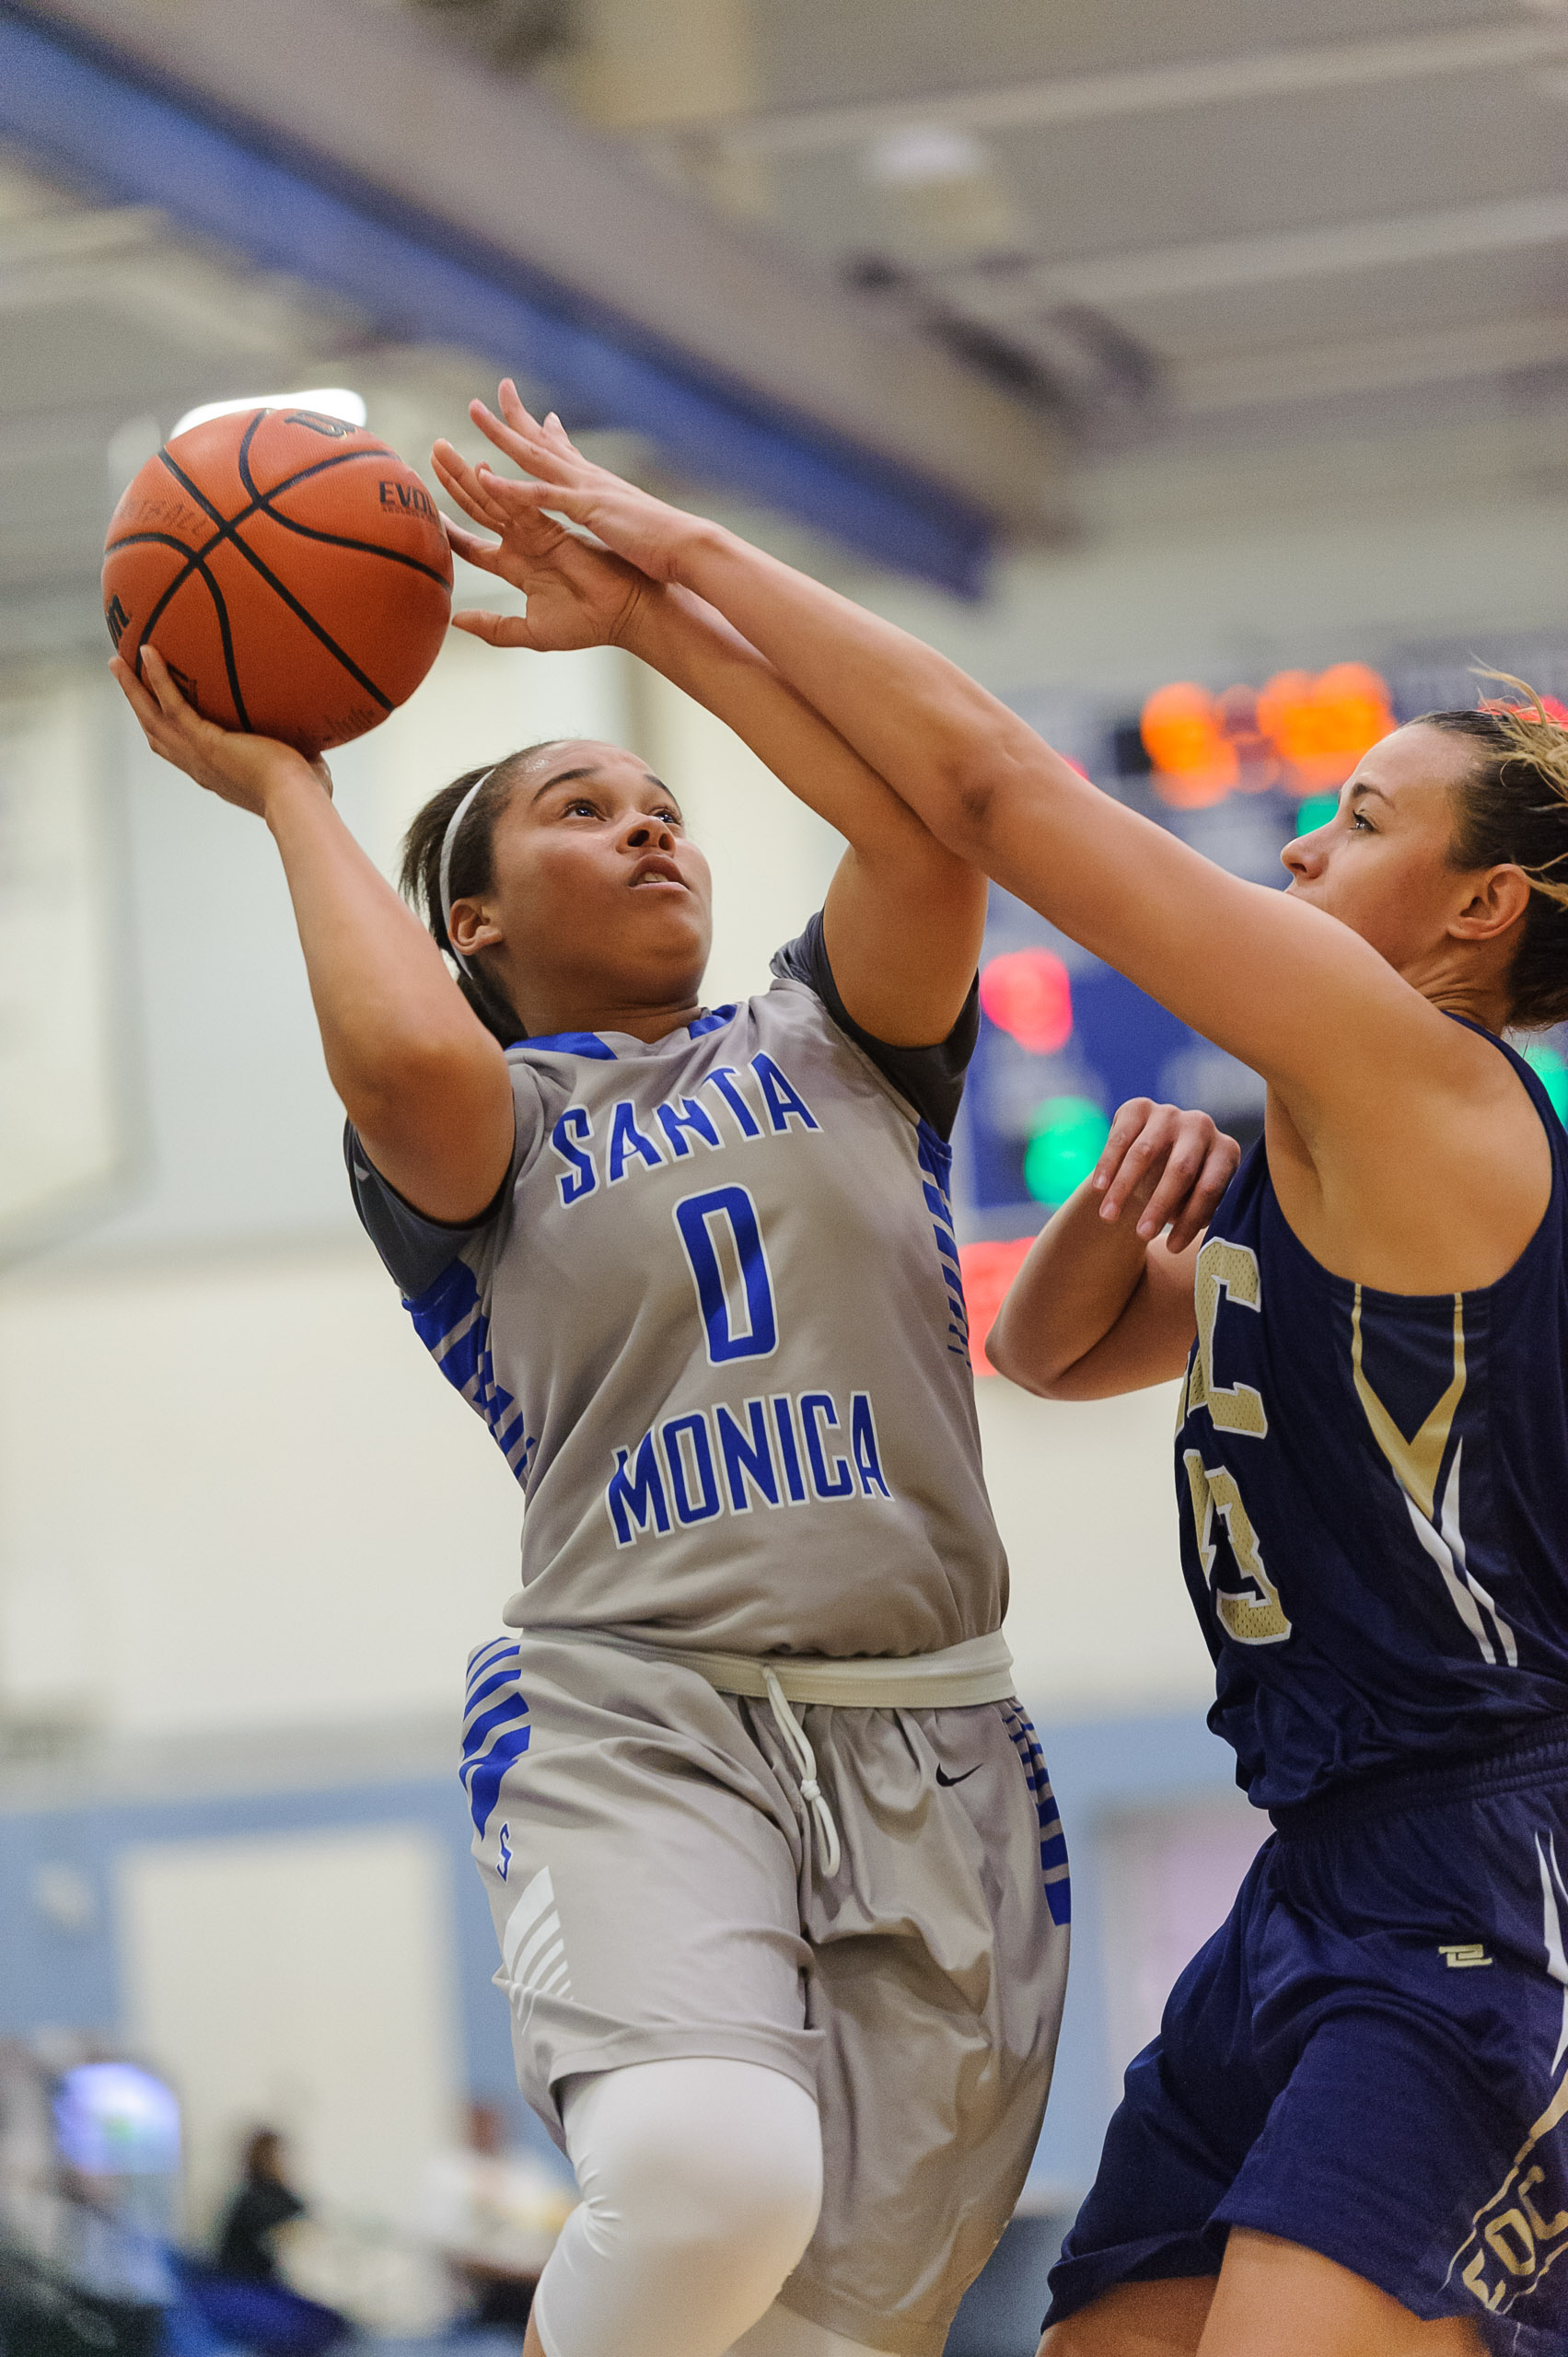  Rejinae Crandell (0,Left) of Santa Monica College goes up for a shot while contested by Kalana Inemer (43,Right) of the Canyons. The Santa Monica College Corsairs lose the game 108-70 to the College of the Canyons Cougars. The game was held at the S